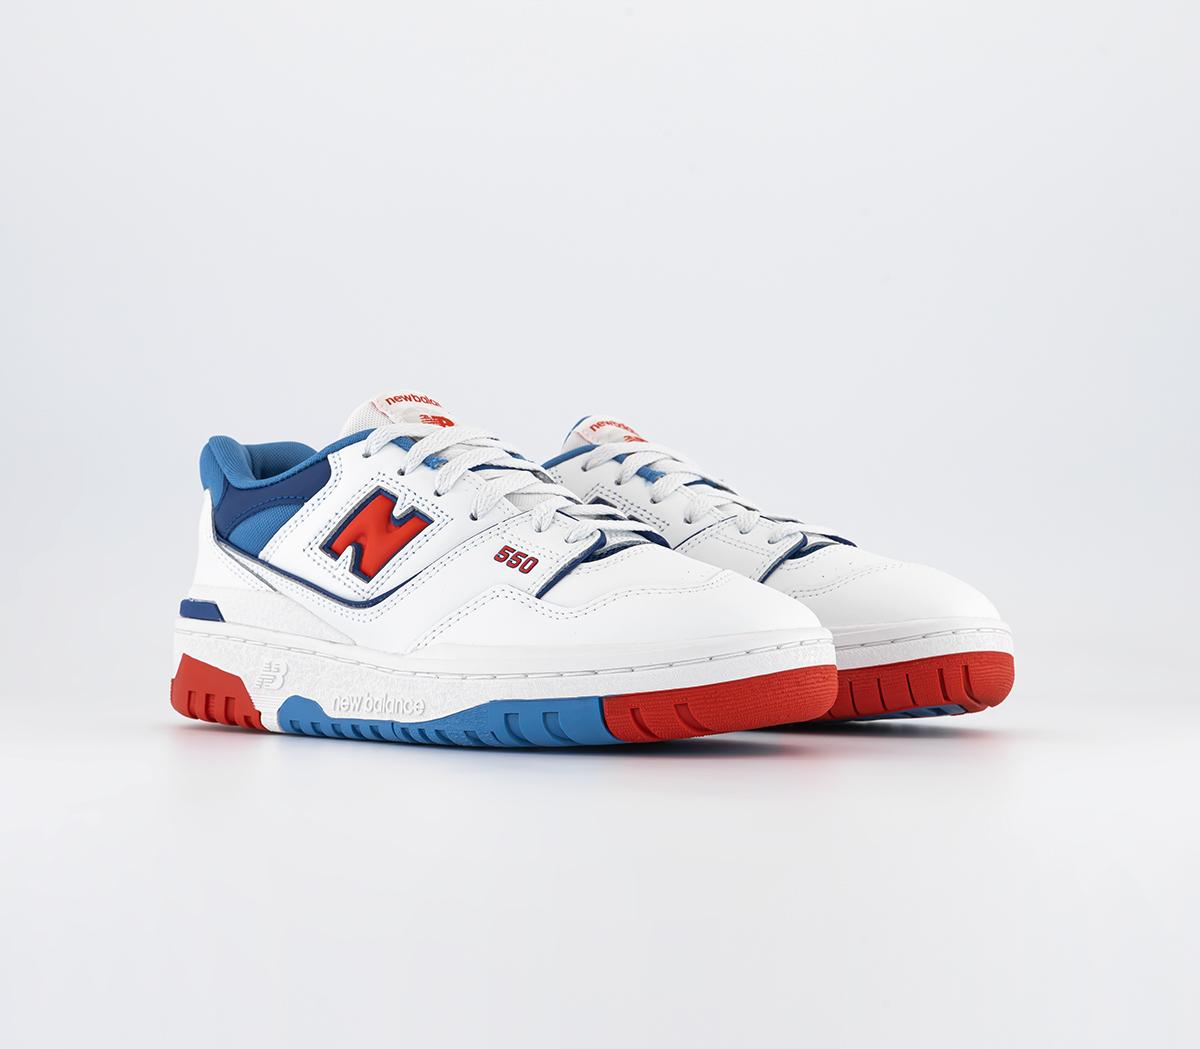 New Balance Bb550 Gs Trainers White Blue Navy Red, 4